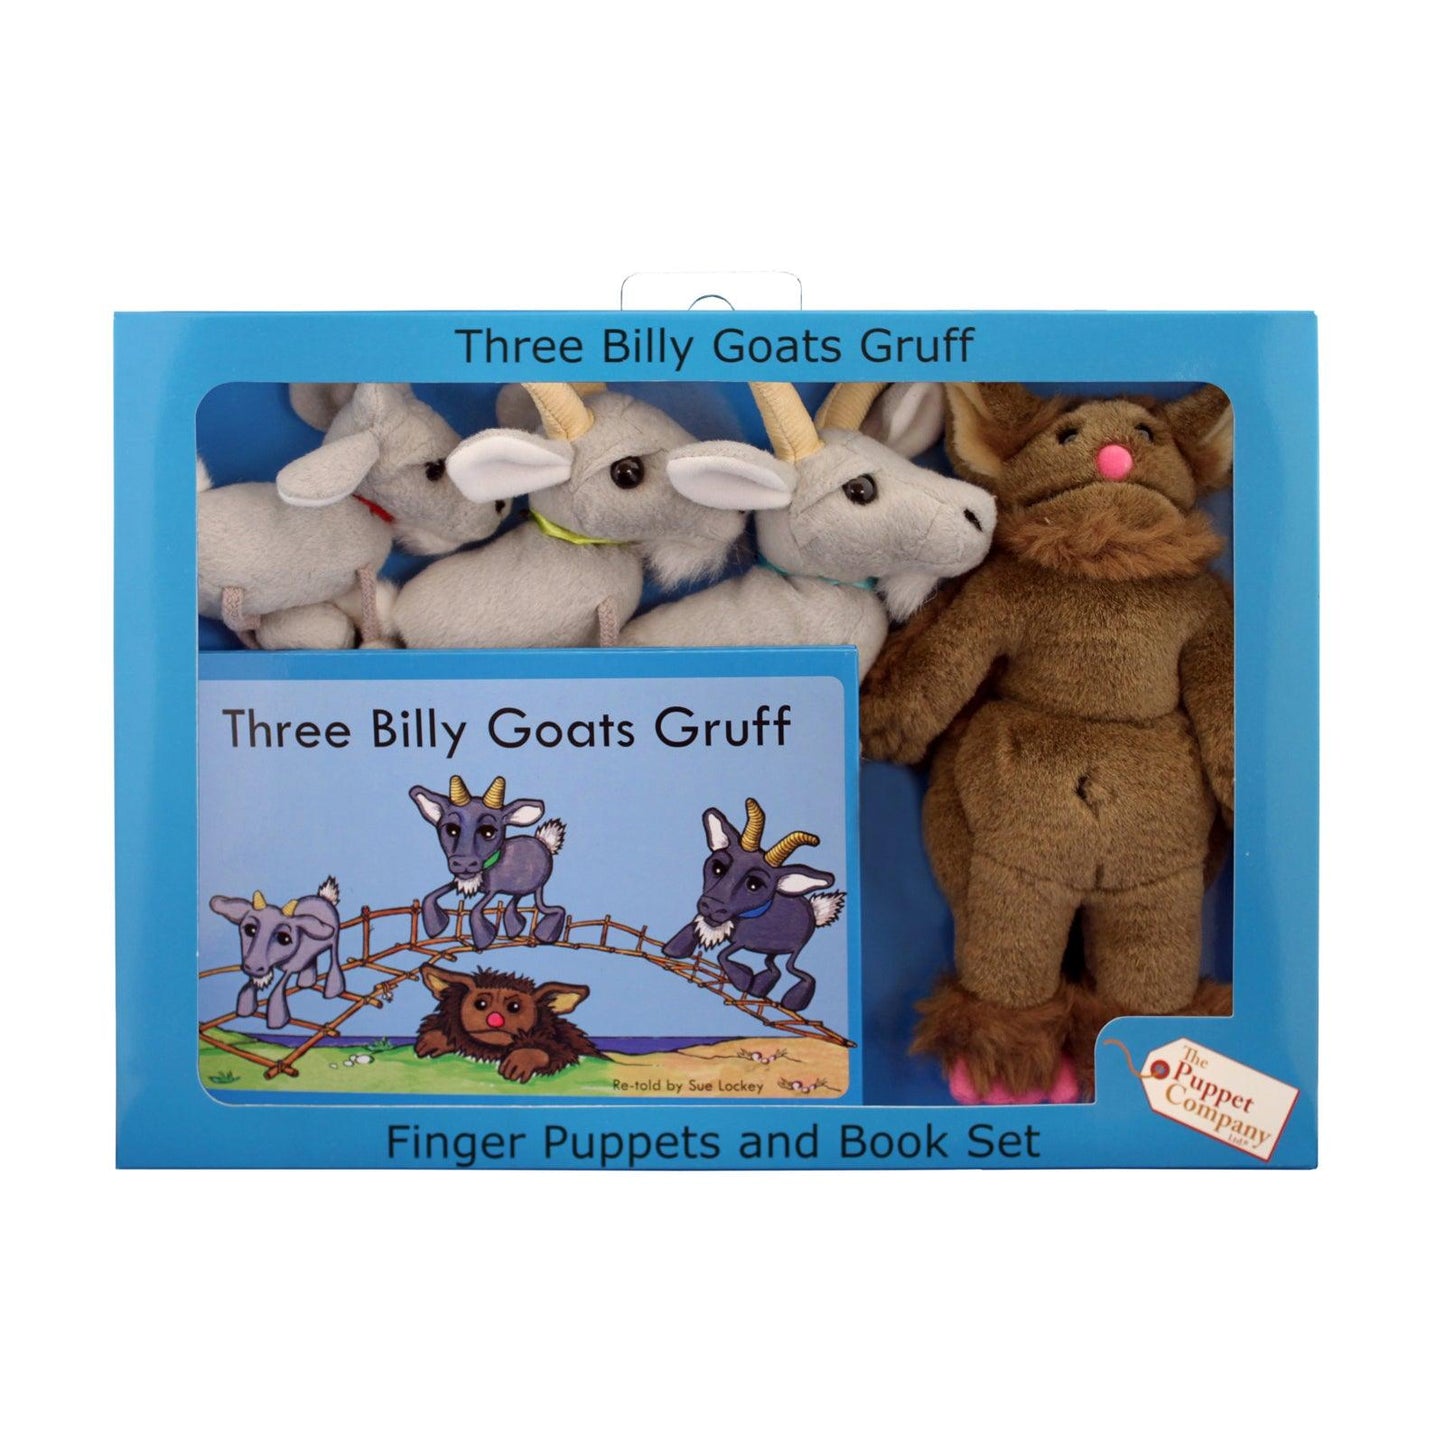 The Three Billy Goats Gruff Finger Puppets and Book Set - Loomini